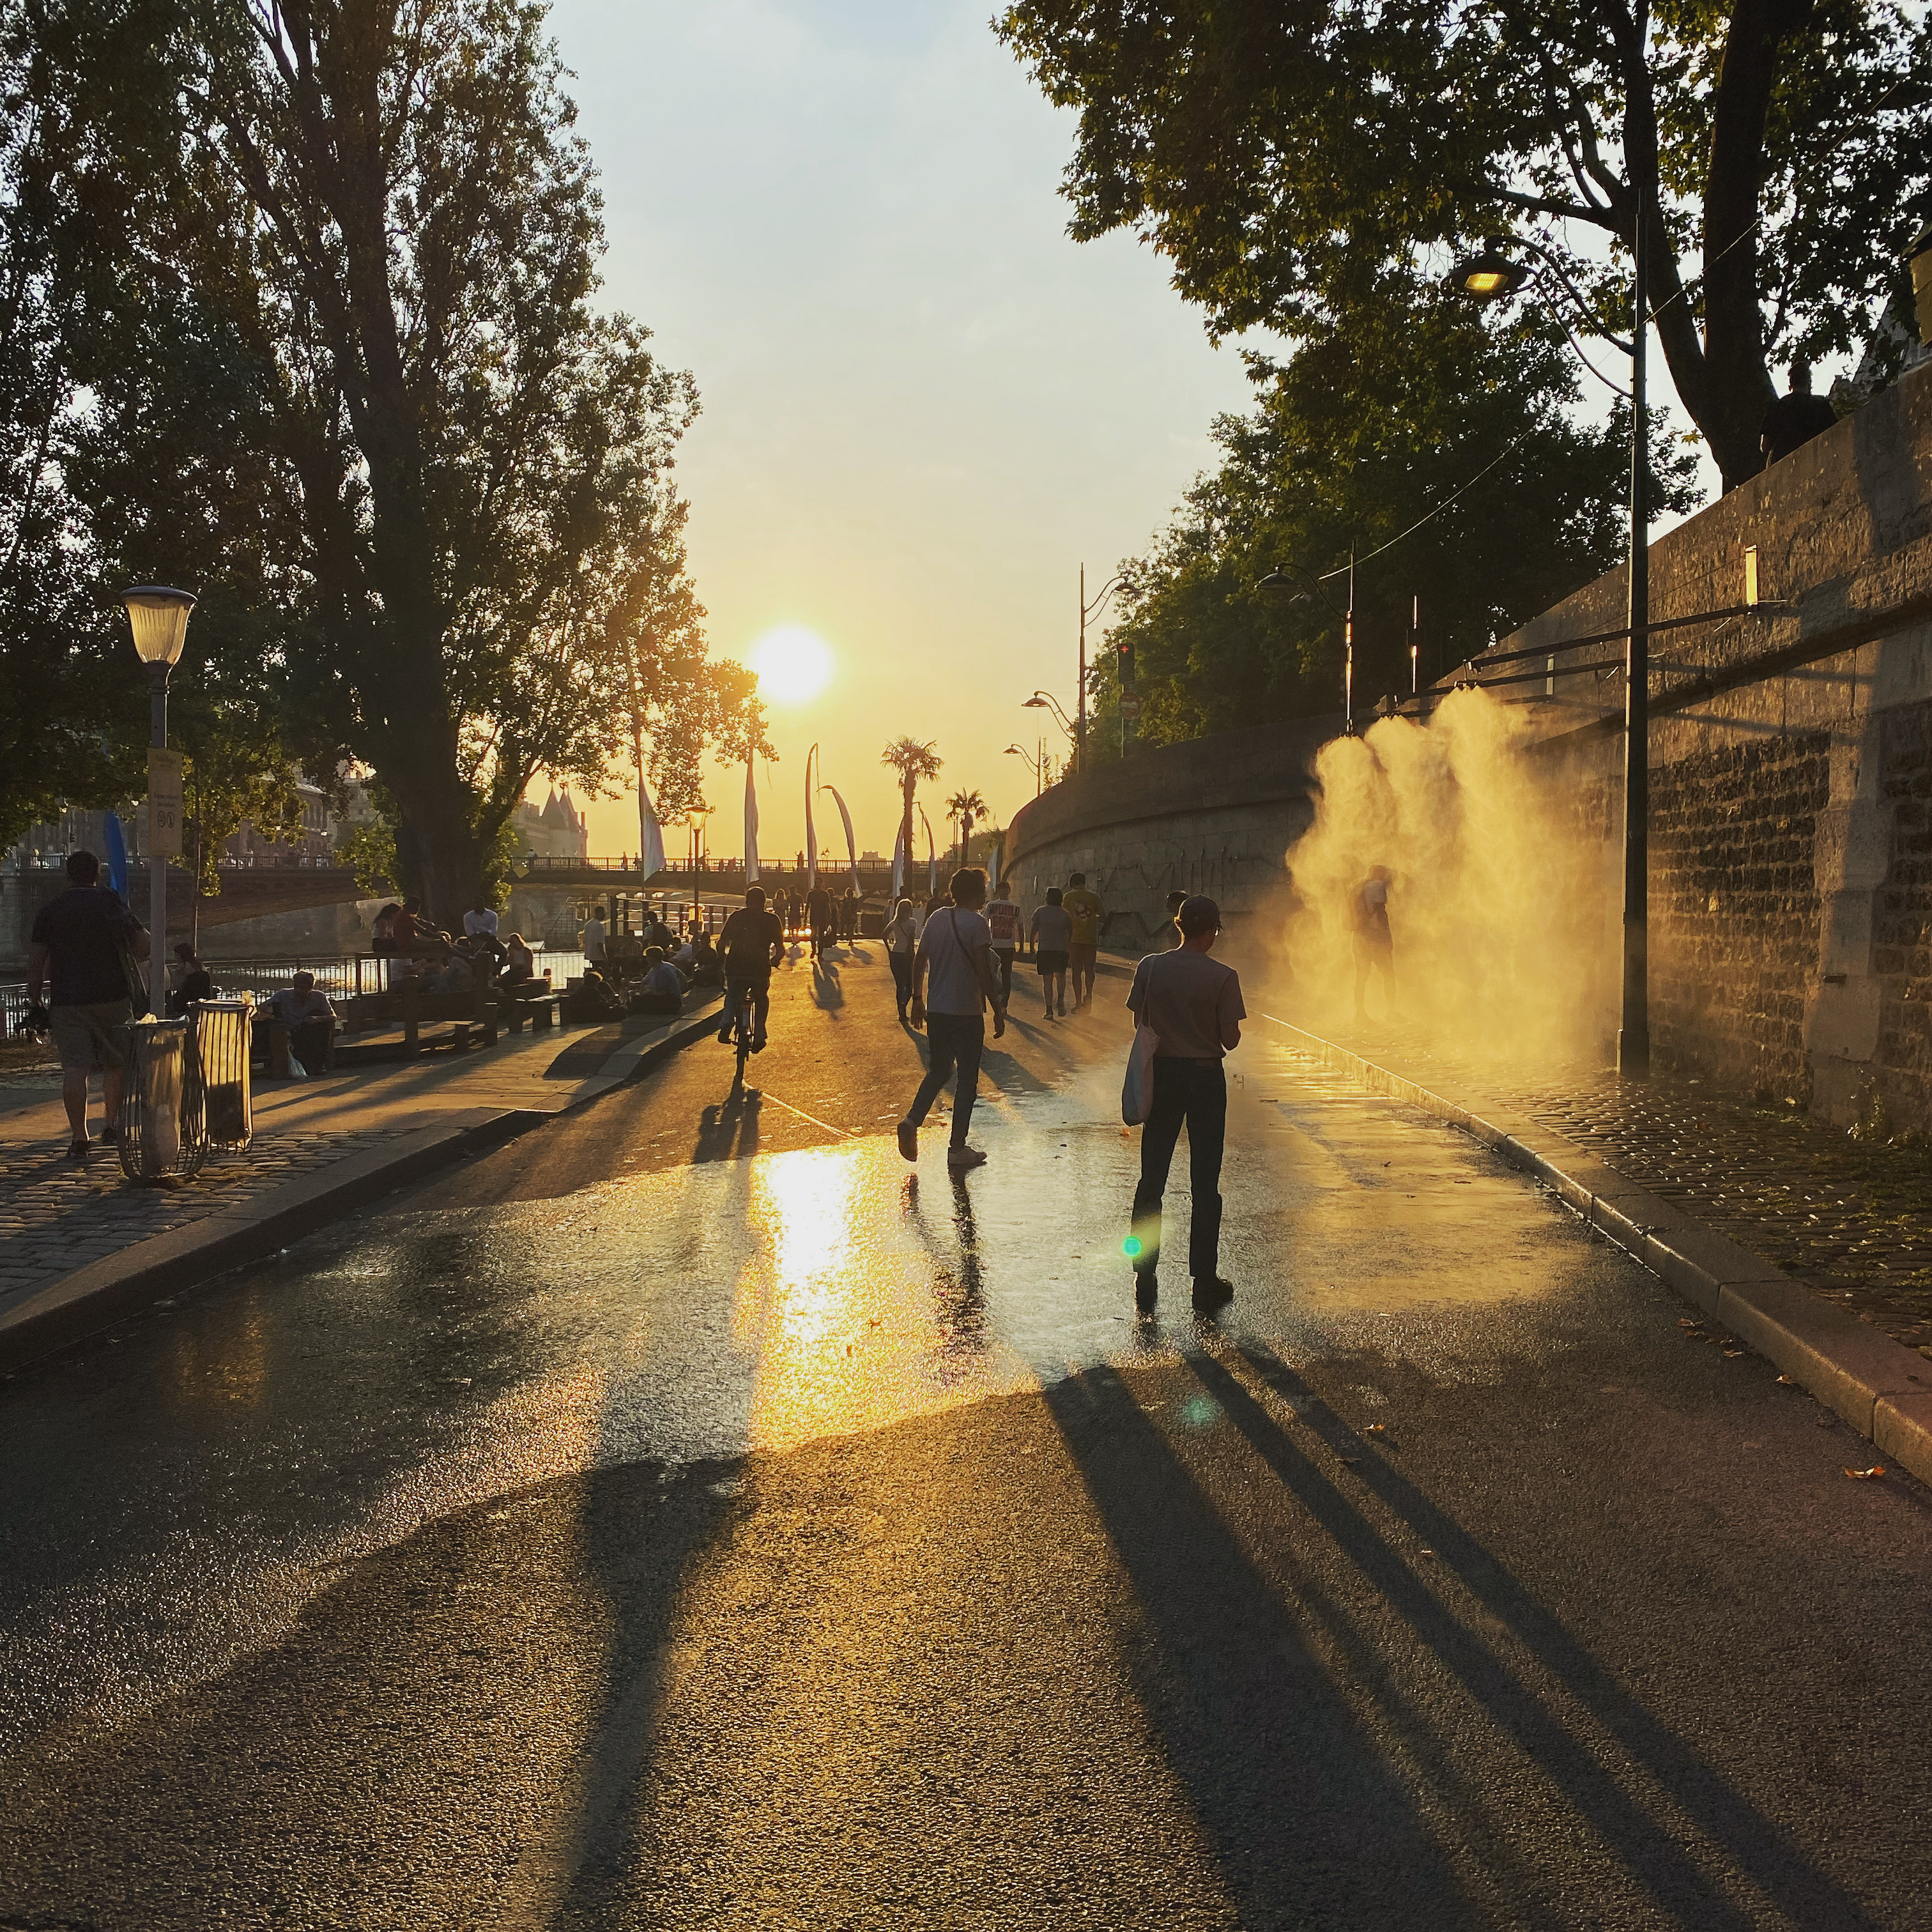 People walking and cycling on a pedestrianised street in Paris. The heat of the day can be seen from the water evaporating on the street.